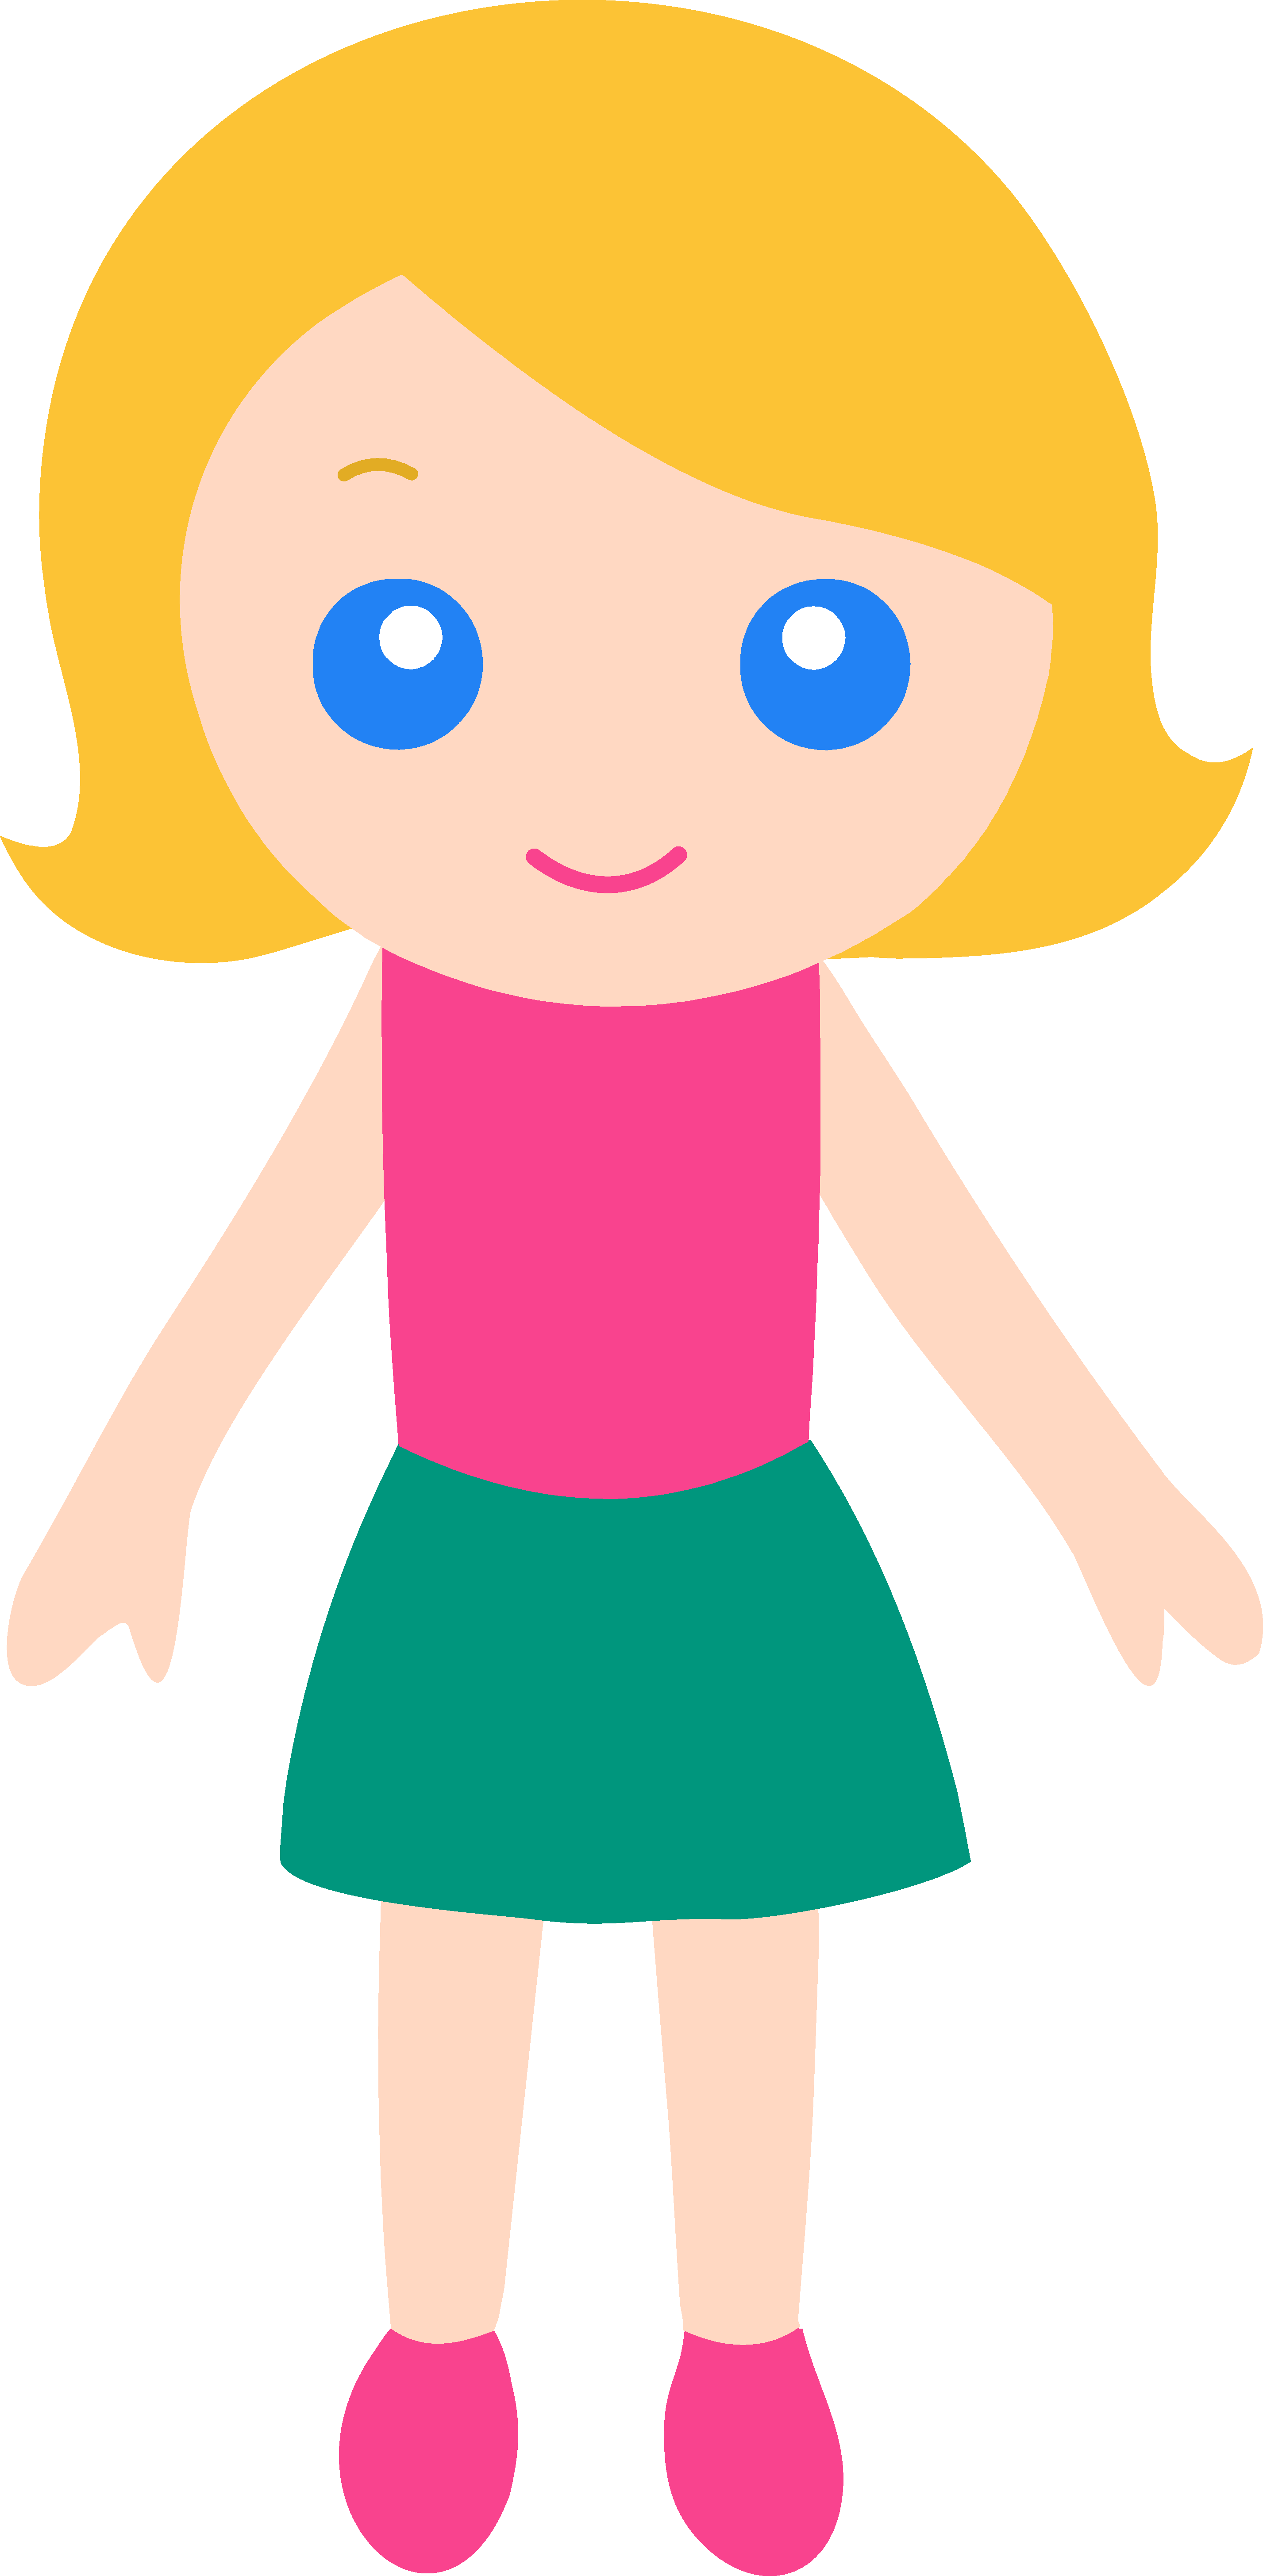 Clipart of young girl.